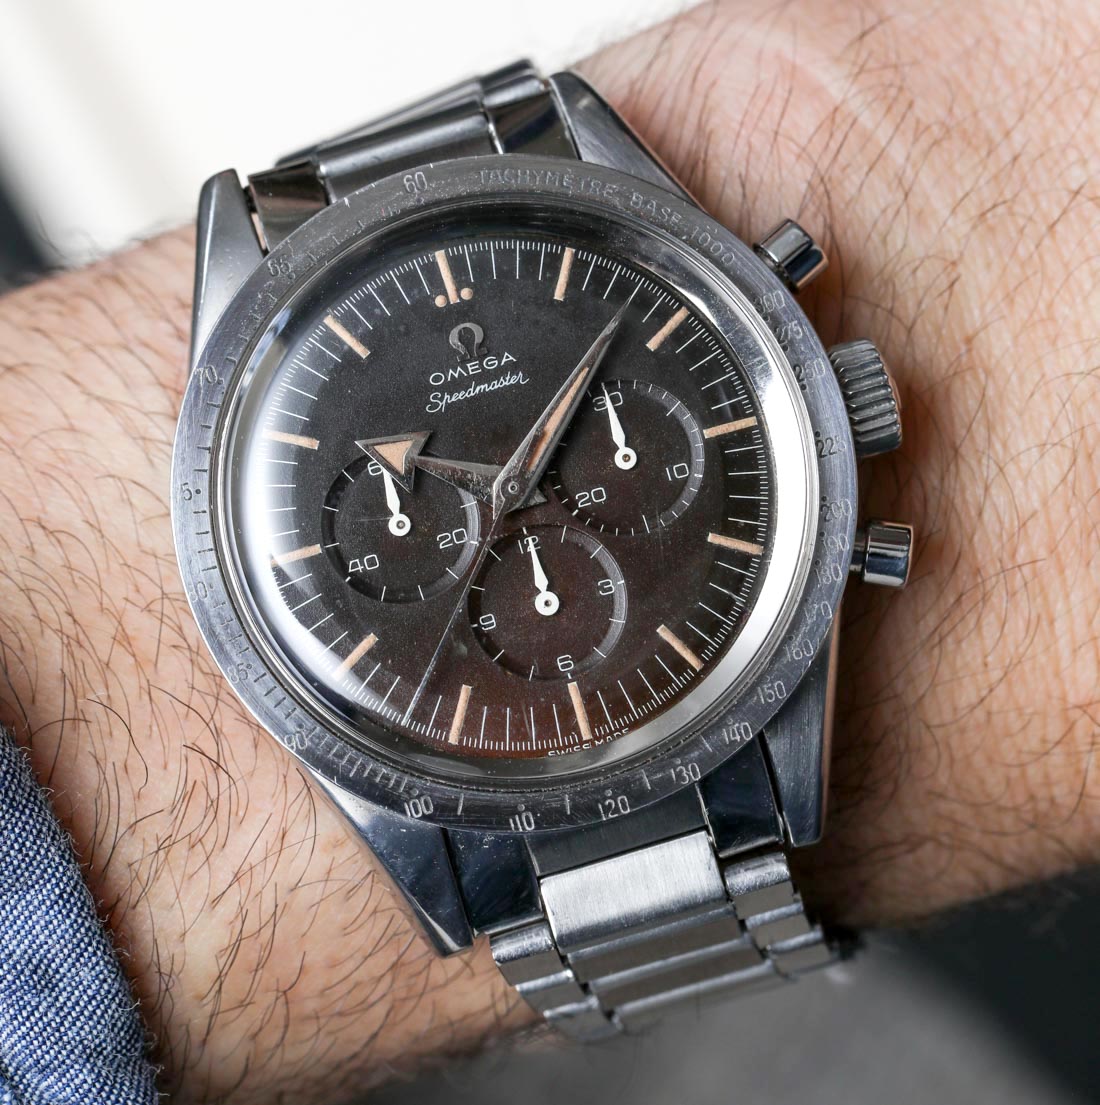 Historical Omega Speedmaster Apollo & Alaska Special Mission Watches Hands-On Hands-On 